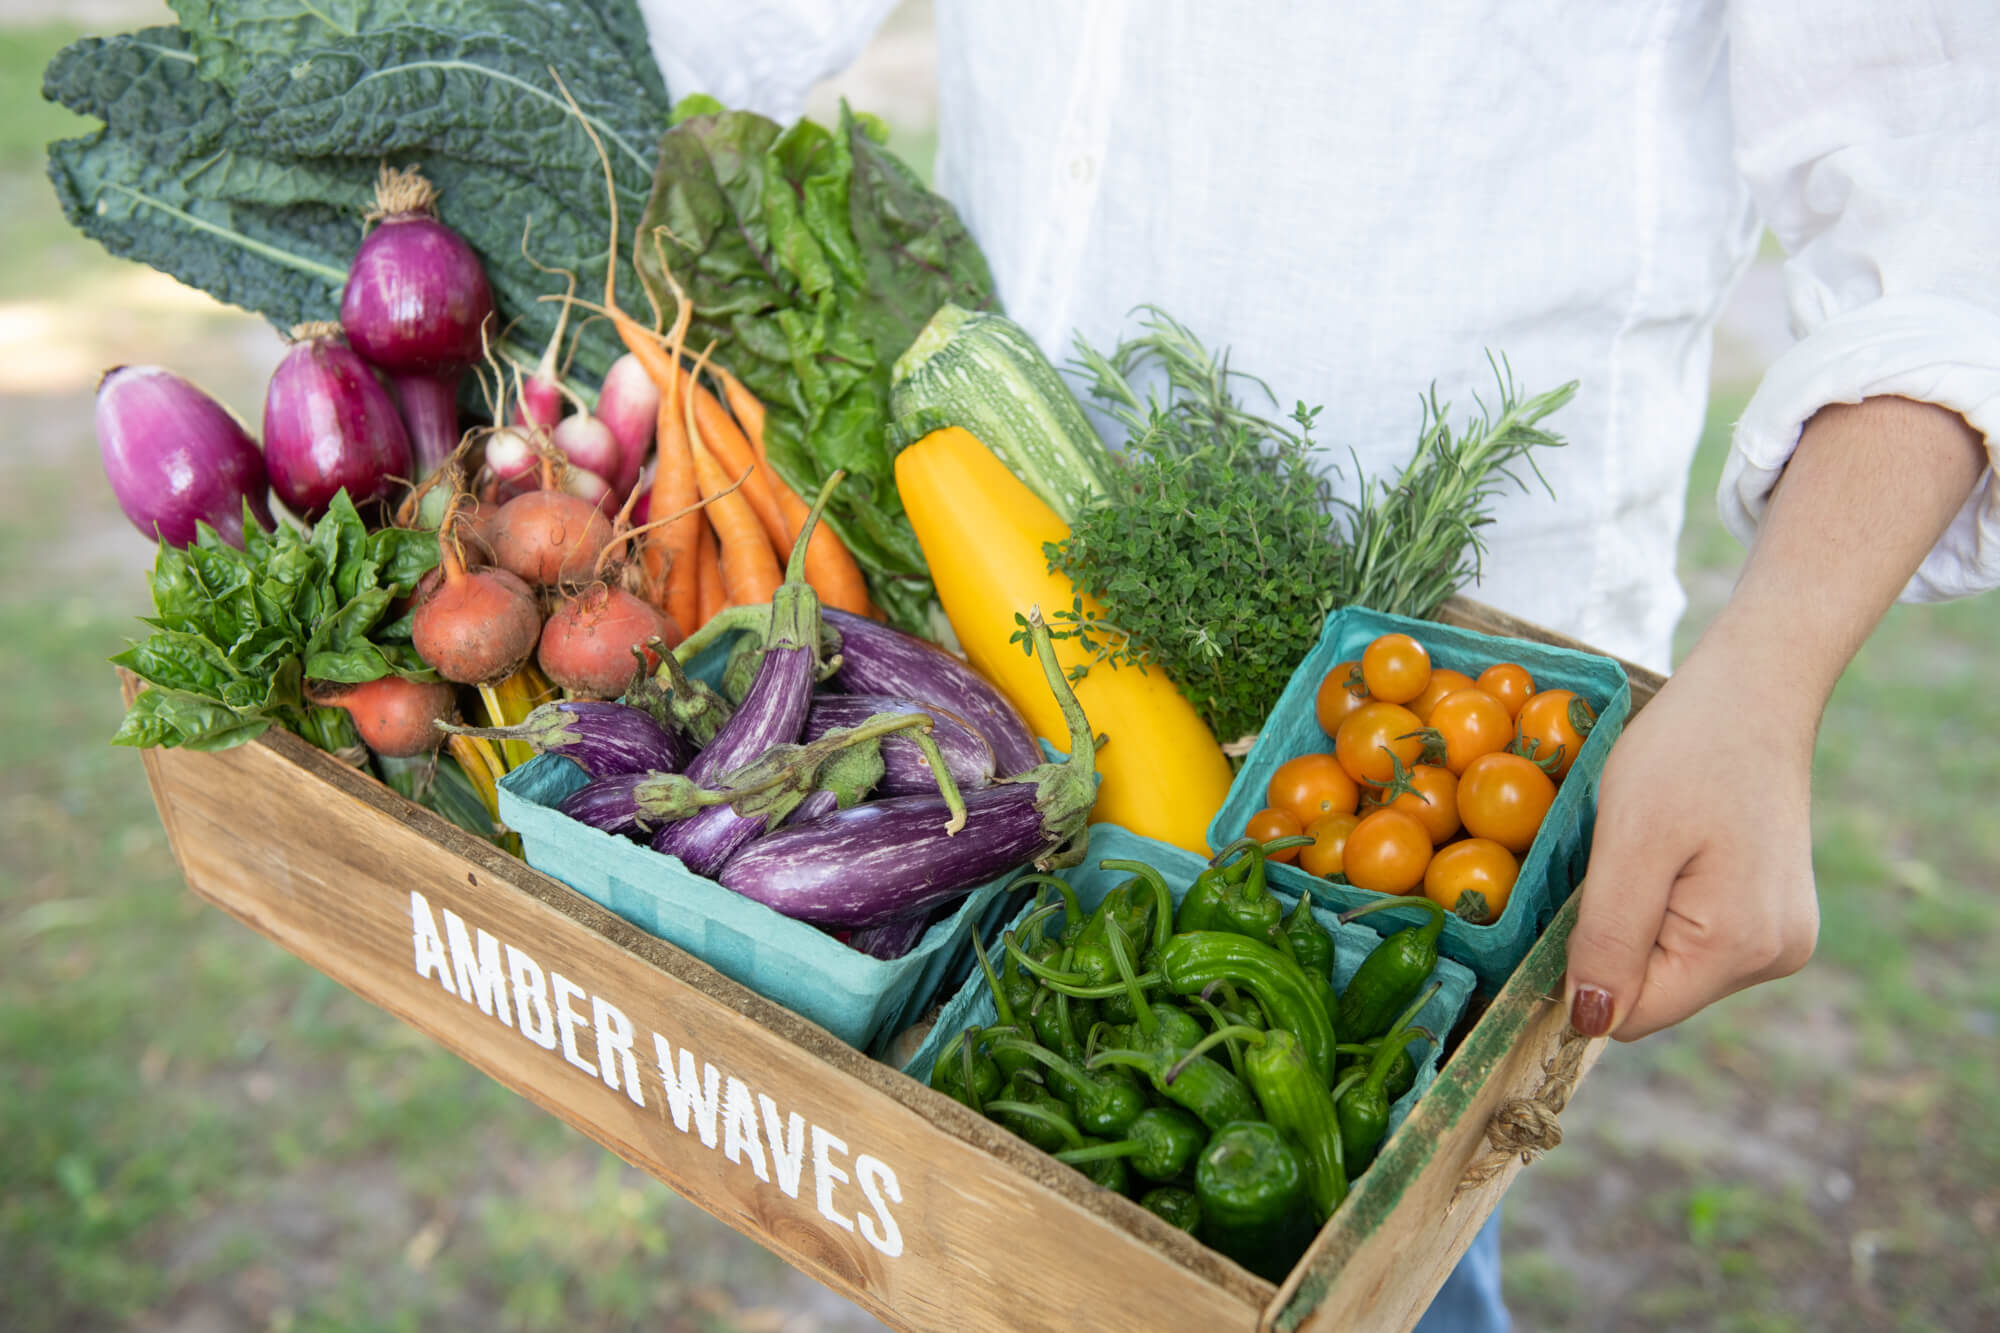 A CSA box of veggies from Amber Waves Farm